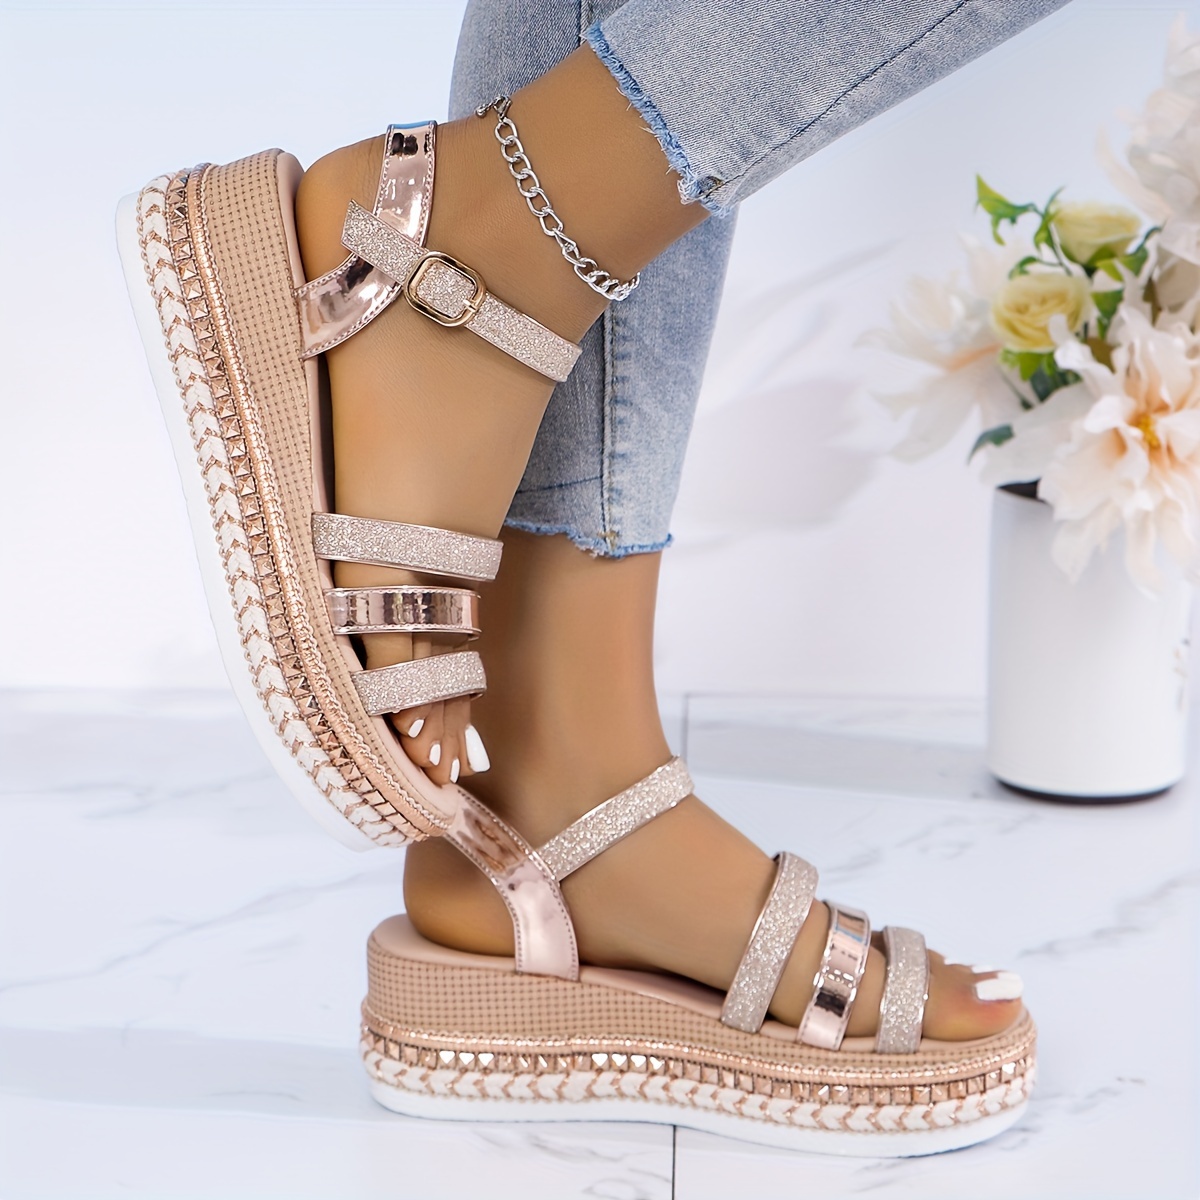 Women Wedge Sandals, Fashion Ankle Strap Shoes Summer